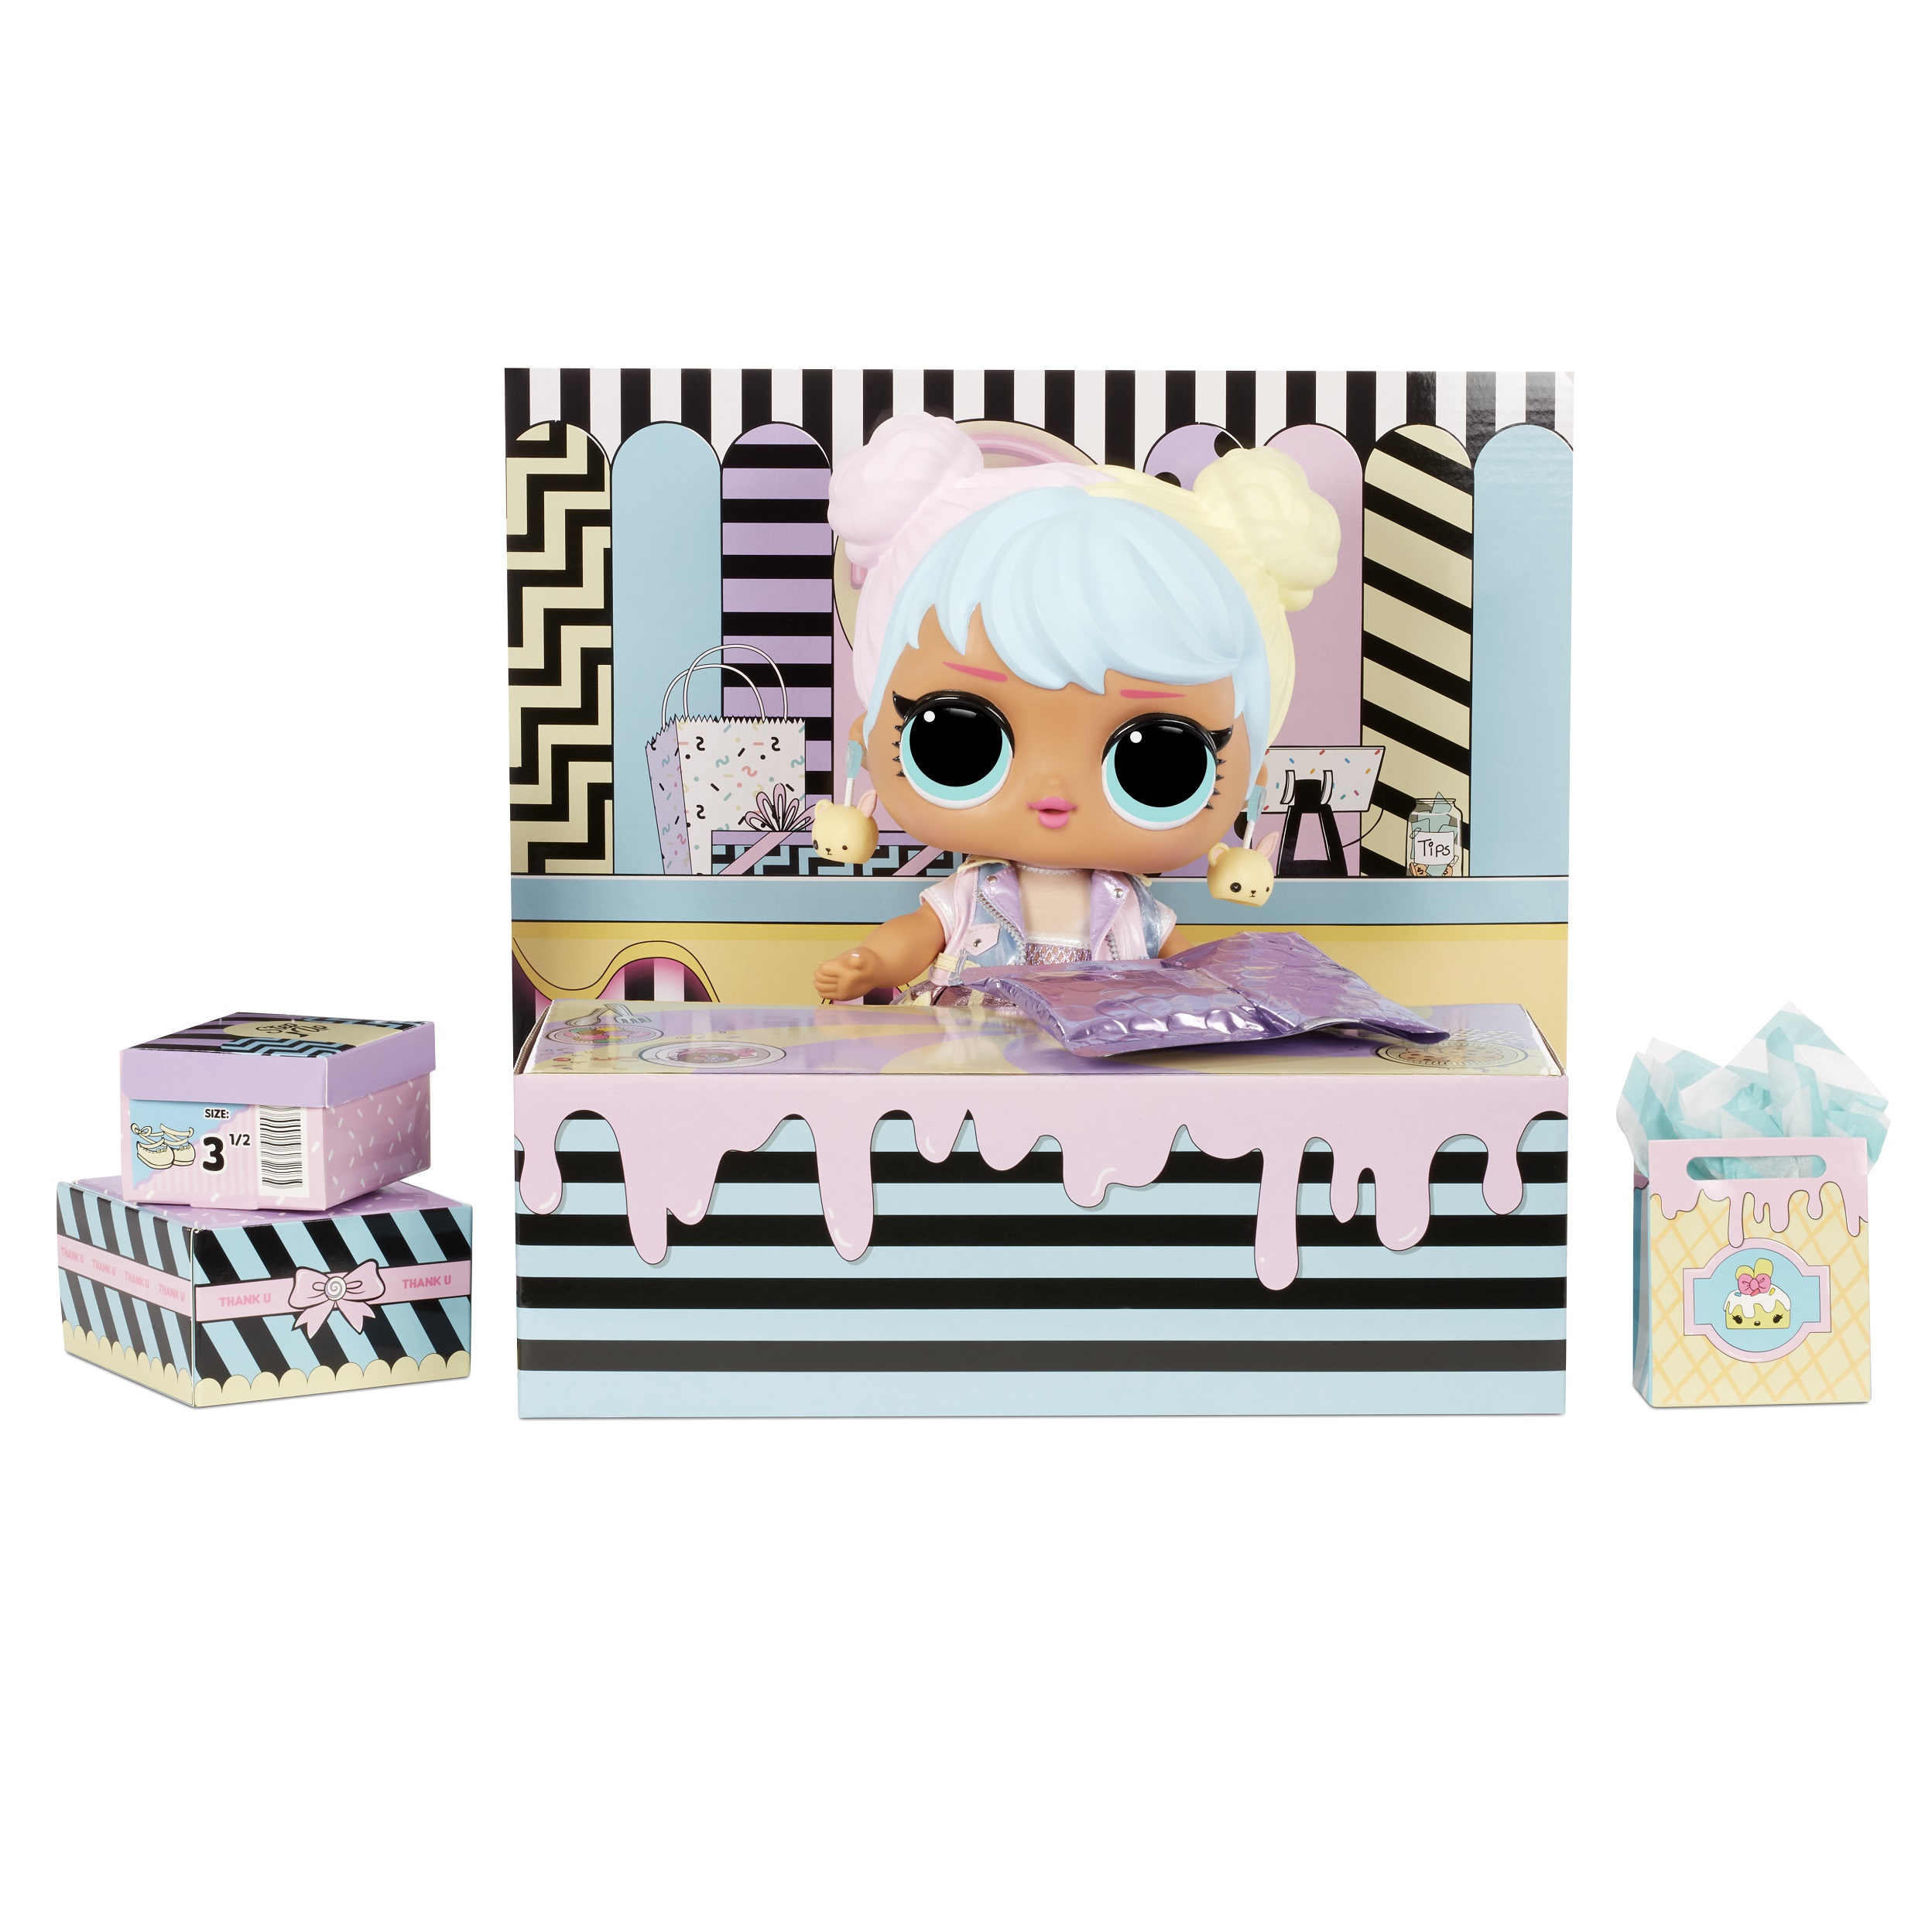 LOL Surprise Big B.B. (Big Baby) Bon Bon – 11" Large Doll, Unbox Fashions, Shoes, Accessories, Includes Playset Desk, Chair and Backdrop - image 4 of 7